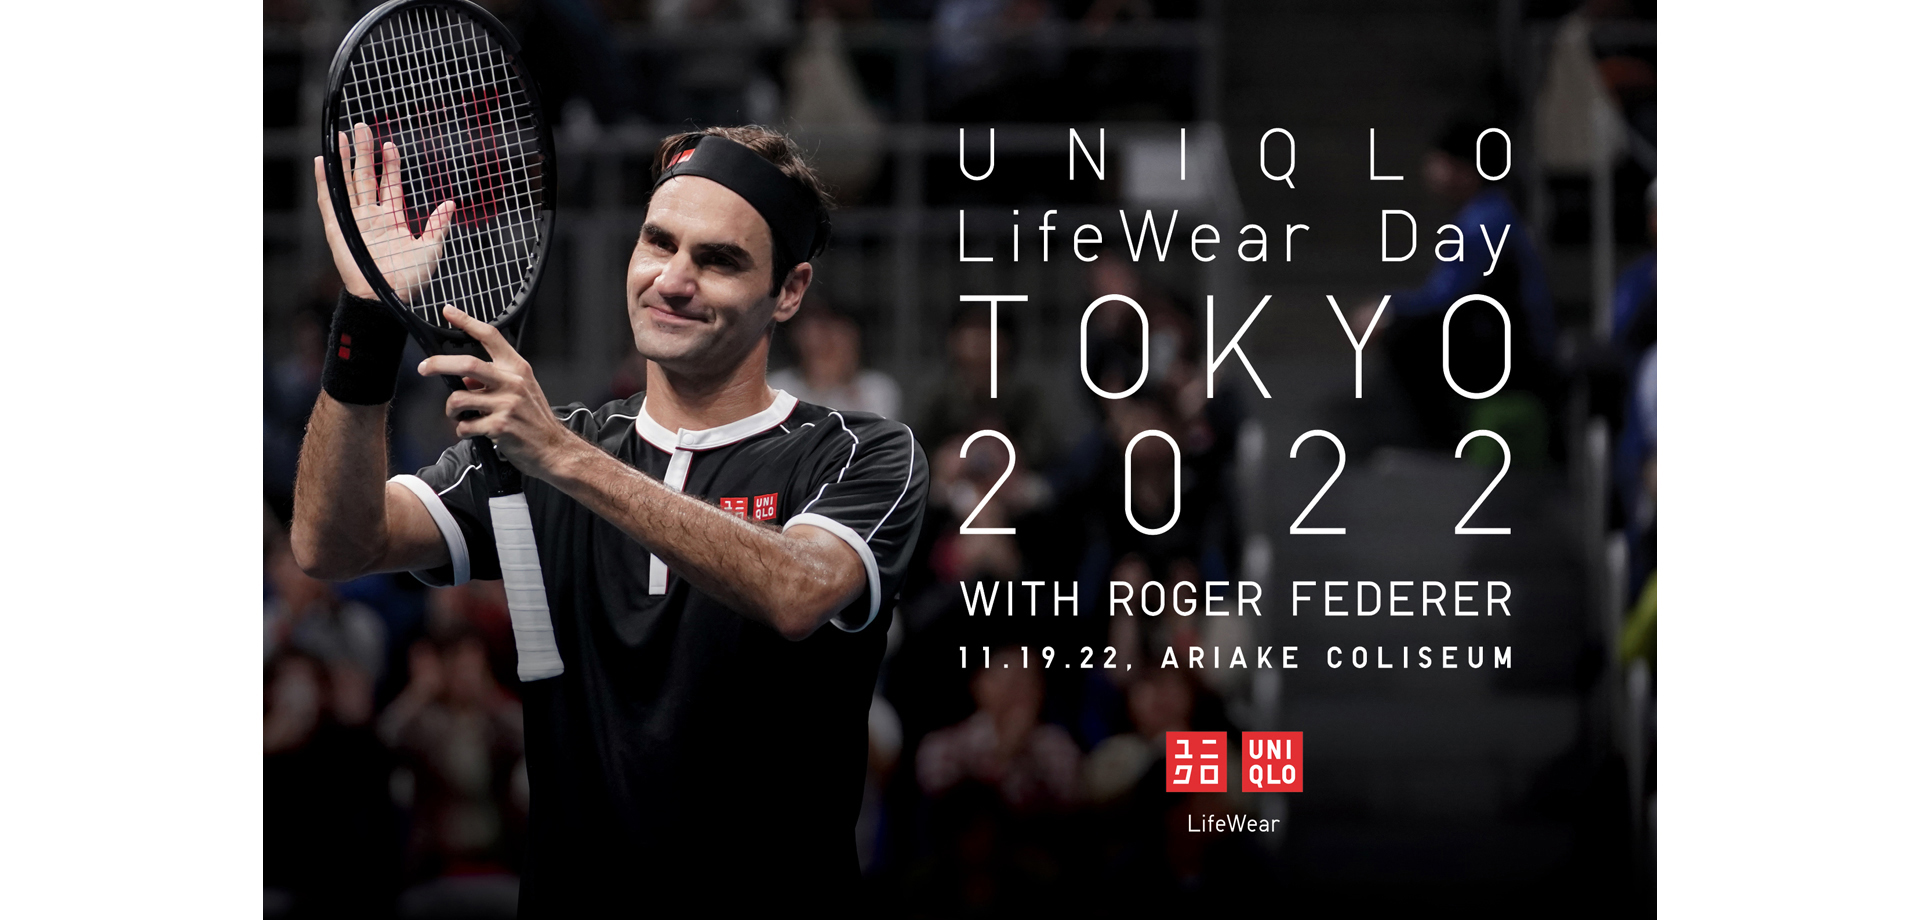 UNIQLO LifeWear Day Tokyo 2022 with Roger Federer